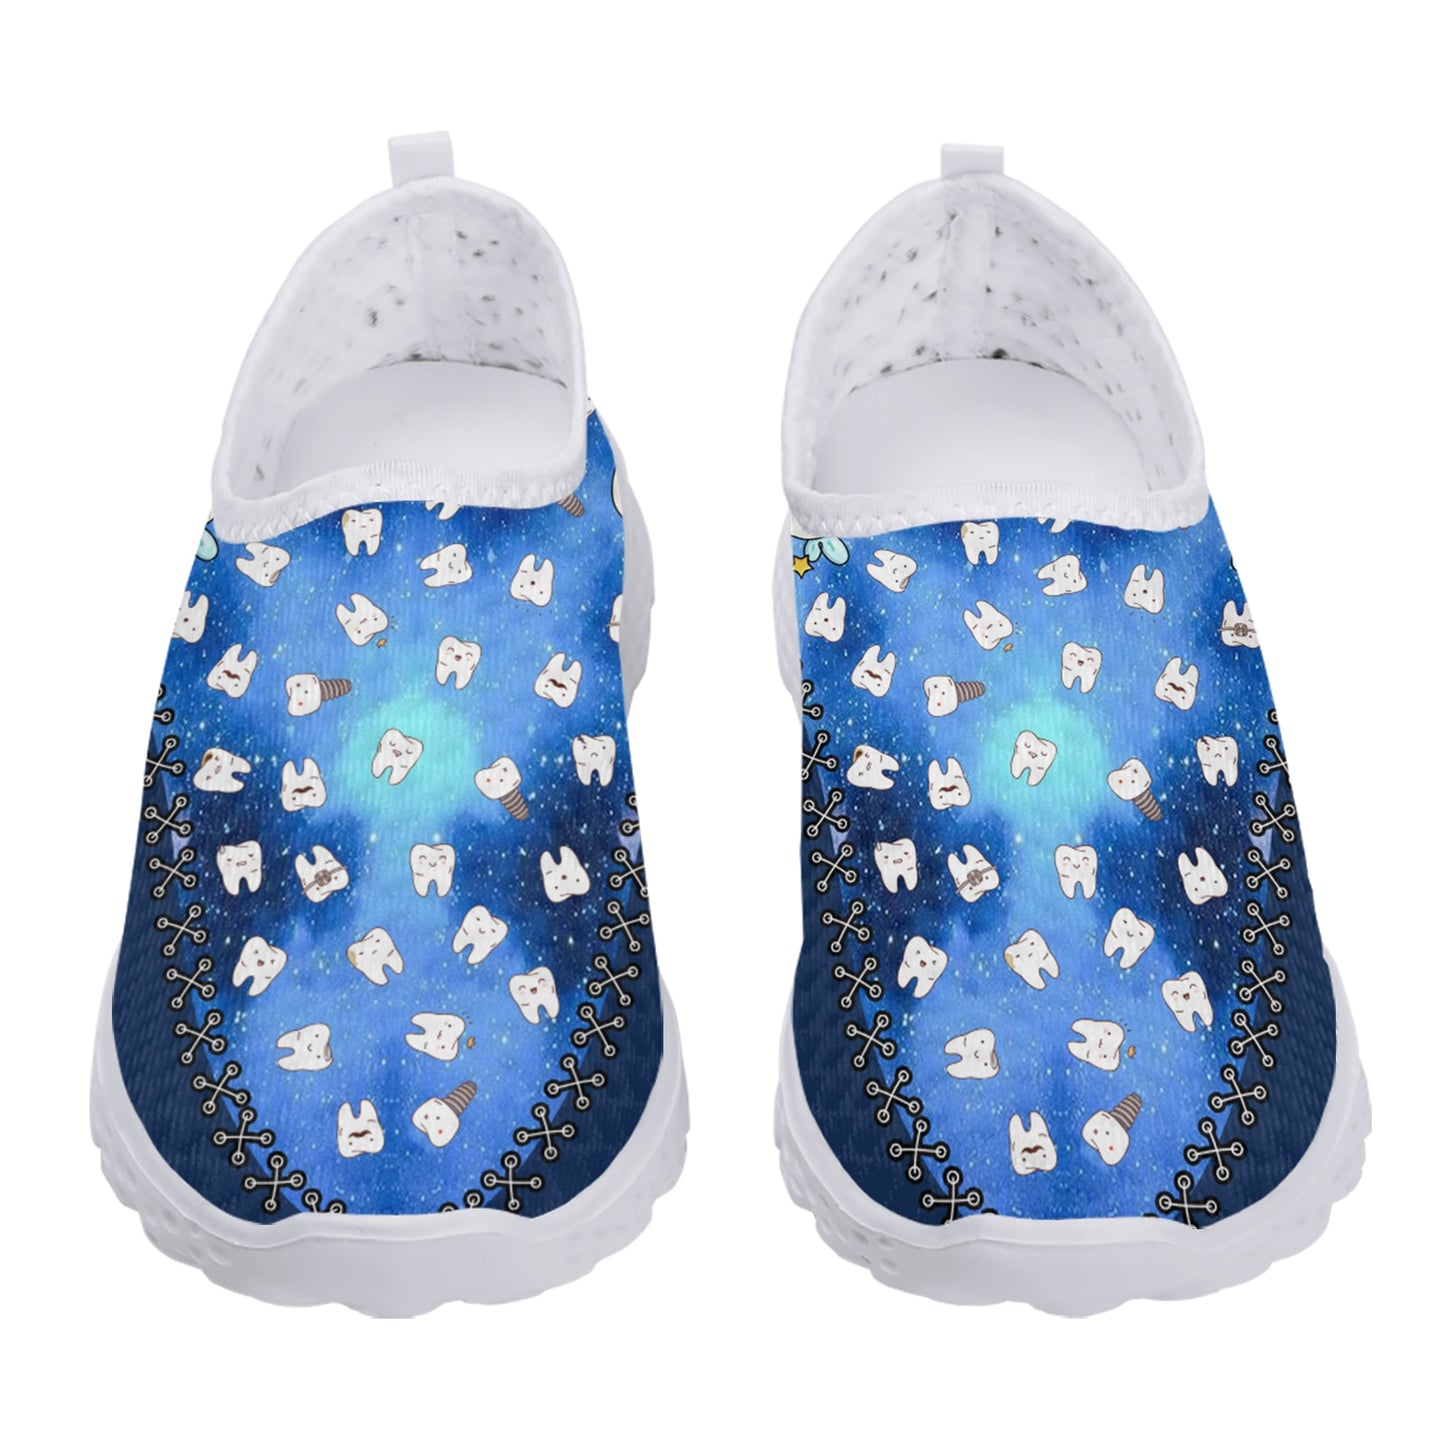 Blue Star Cartoon Teeth Design Lightweight Breathable Mesh Shoes Soft Comfortable Apartment Shoes Walking Shoes